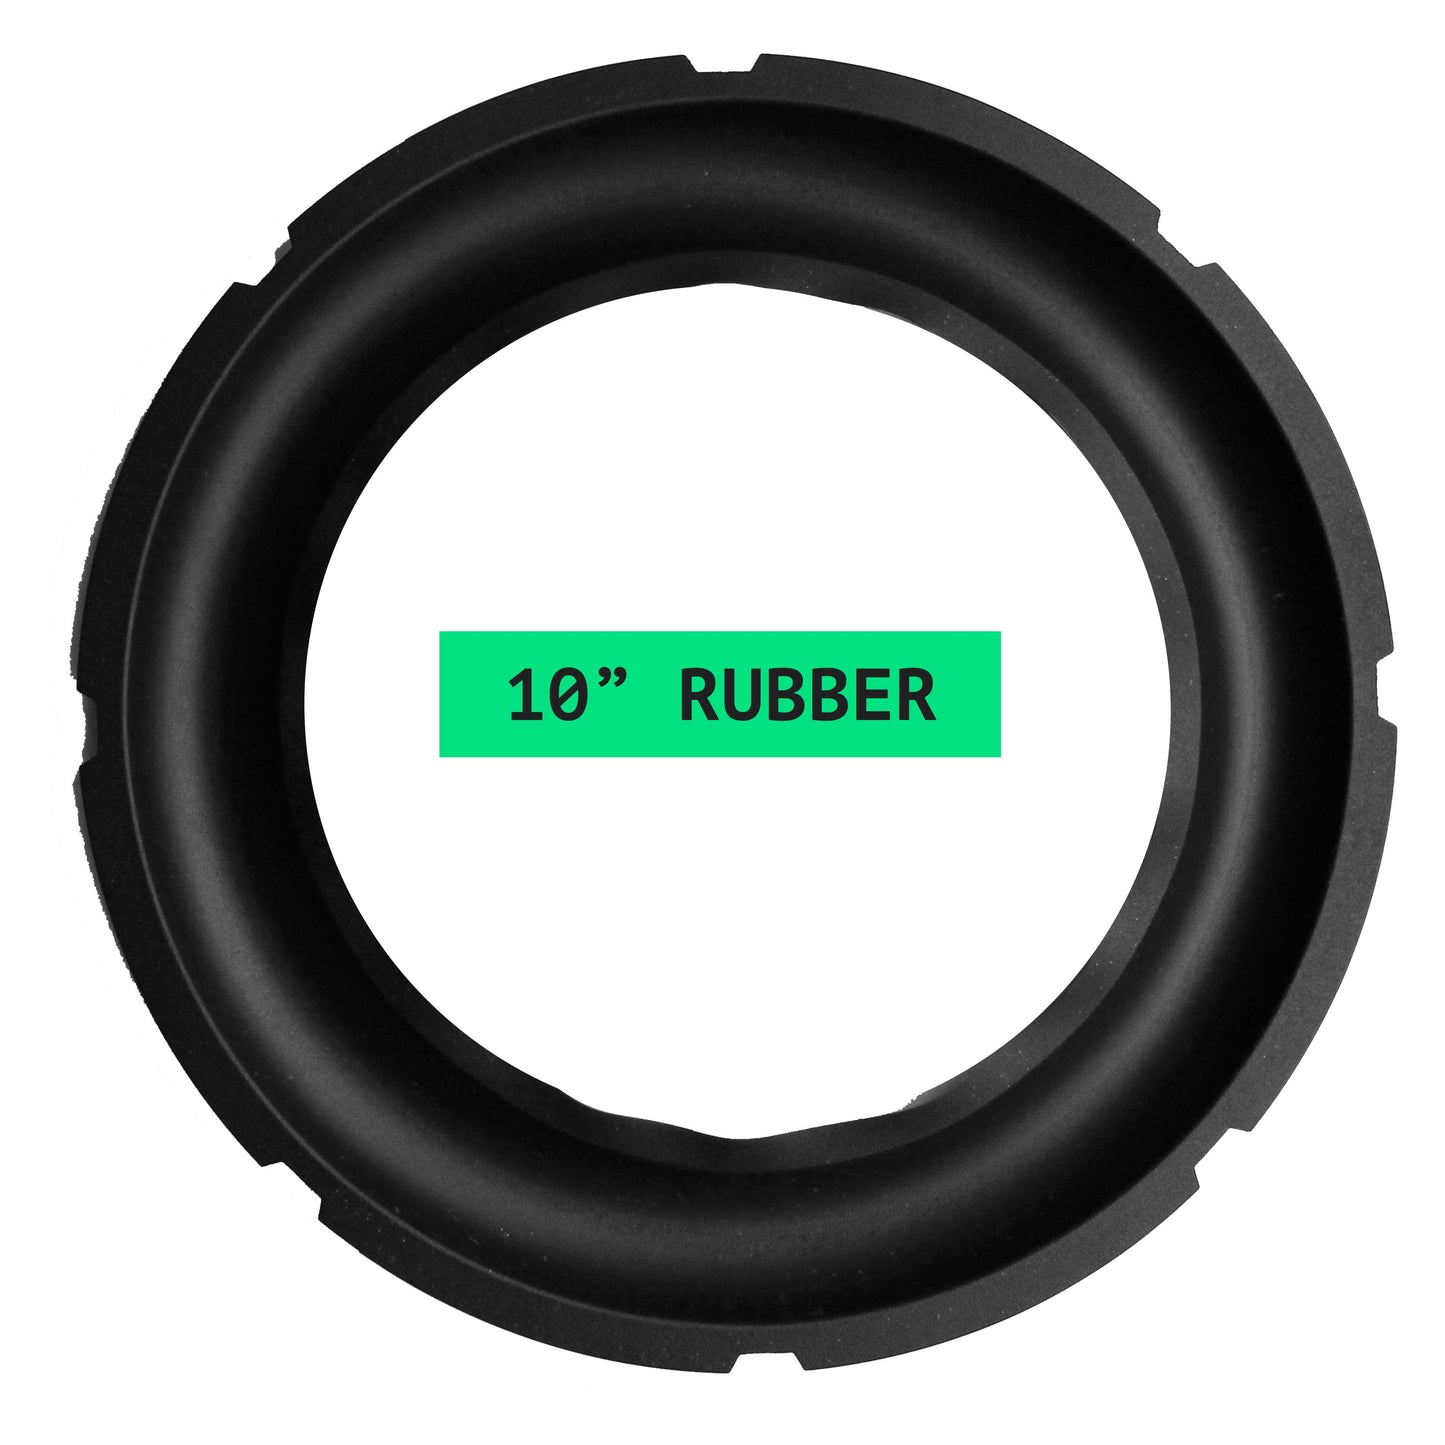 10" Rubber Surround - OD:251MM ID:160MM